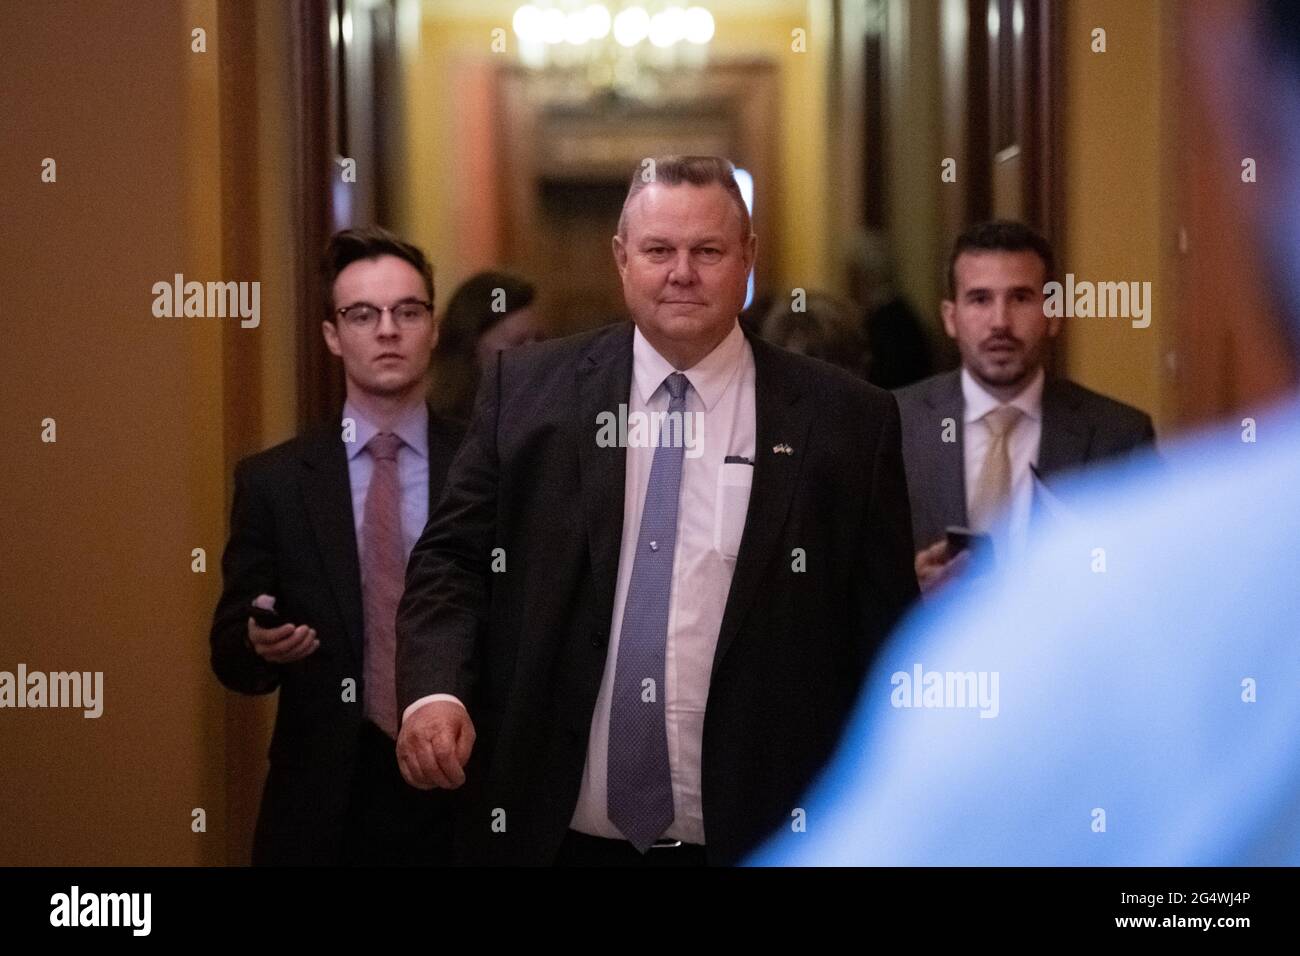 Washington, USA. 23rd June, 2021. Senator Jon Tester (D-MT) leaves a bipartisan meeting of Senators where they discussed infrastructure legislation, at the U.S. Capitol, in Washington, DC, on Wednesday, June 23, 2021. Last night Senate Republicans filibustered a voting rights bill as bipartisan negotiations over infrastructure legislation grind on with little apparent progress building a package to beat the 60-vote filibuster threshold. (Graeme Sloan/Sipa USA) Credit: Sipa USA/Alamy Live News Stock Photo